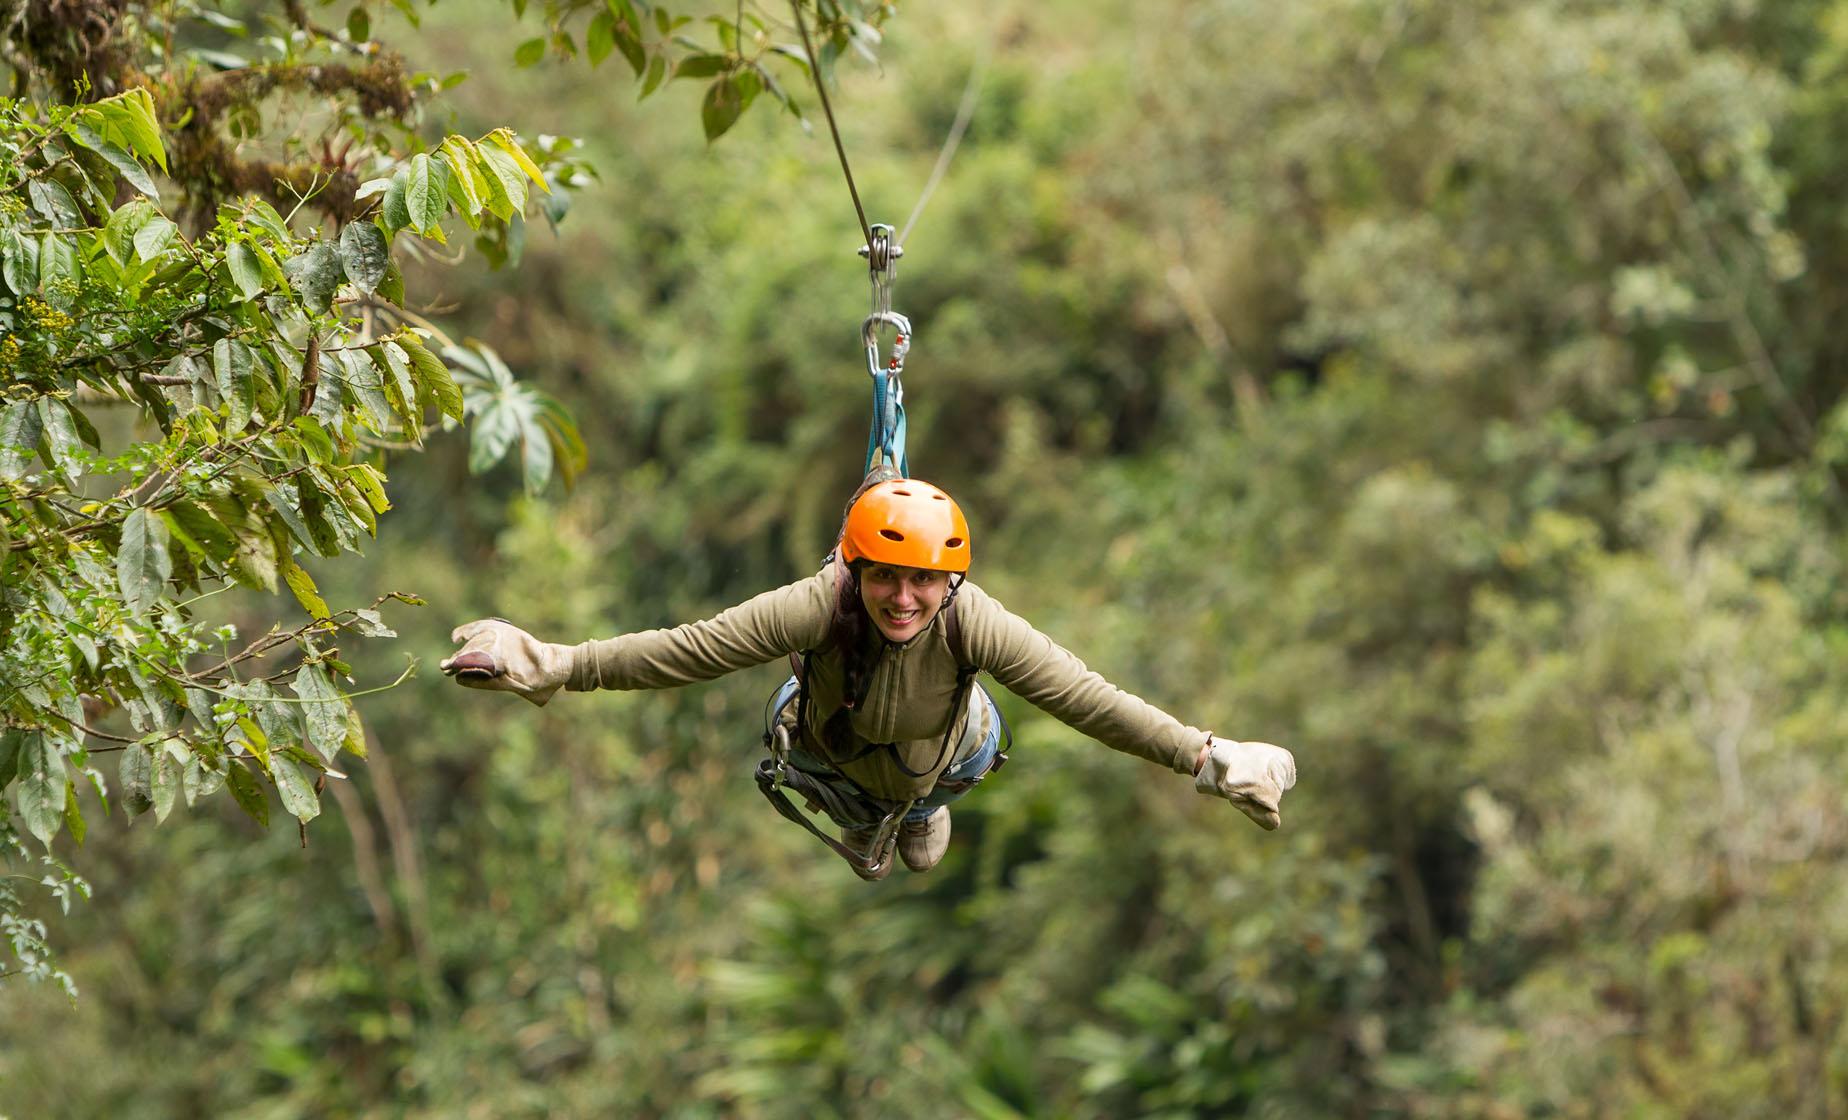 Puerta Limon Canopy Zip Line and Banana Plantation in Costa Rica